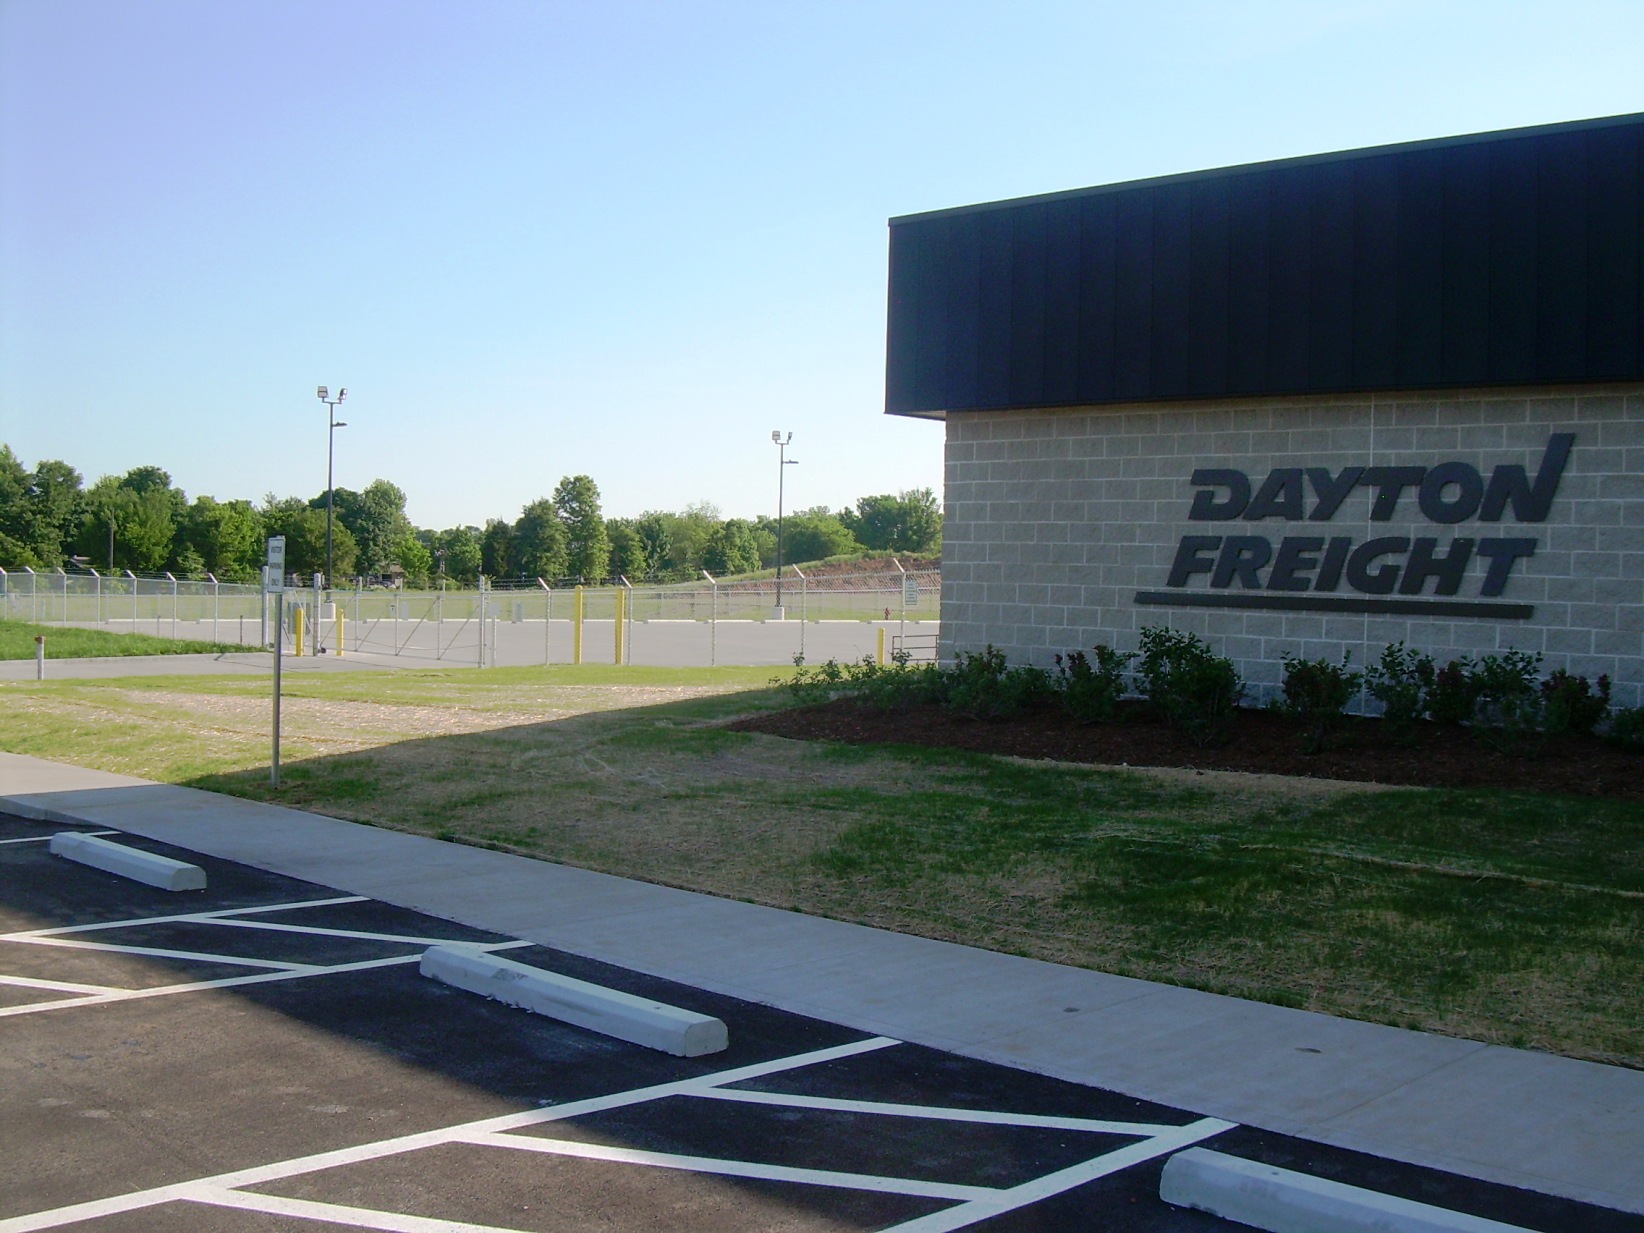 Dayton Freight - Springfield, Missouri - Commercial Chain Link